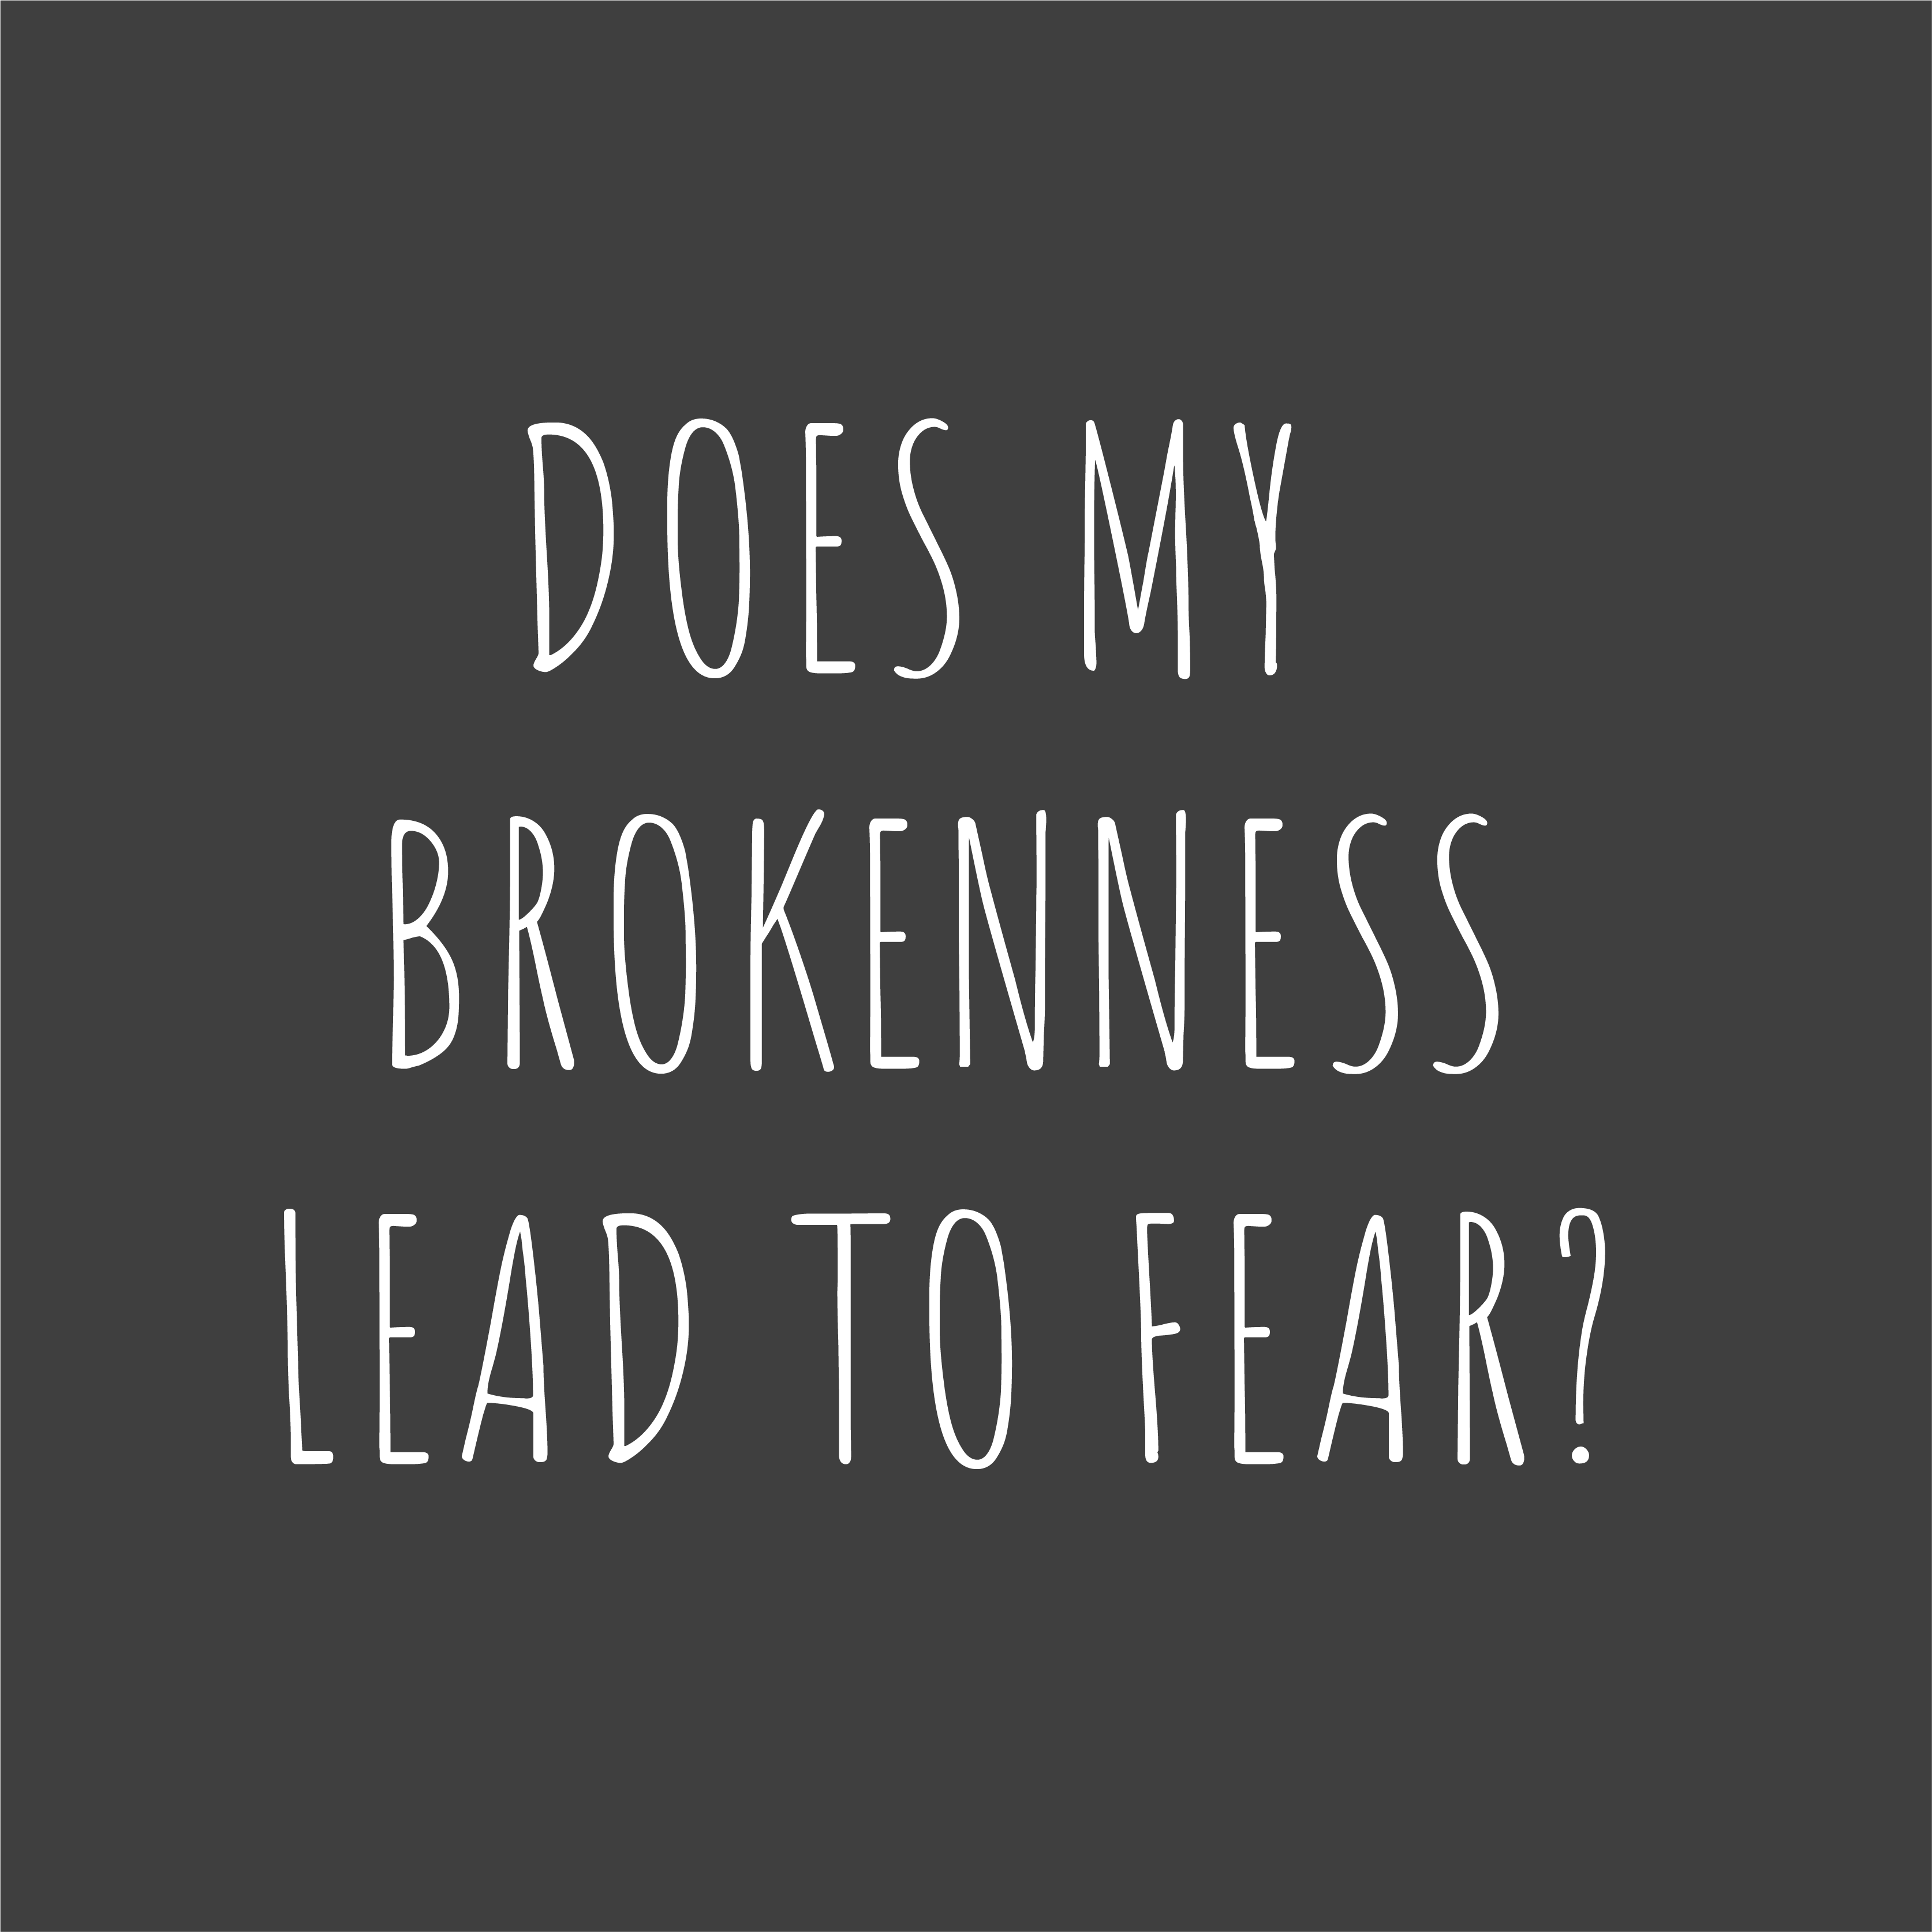 does my brokenness lead to fear?